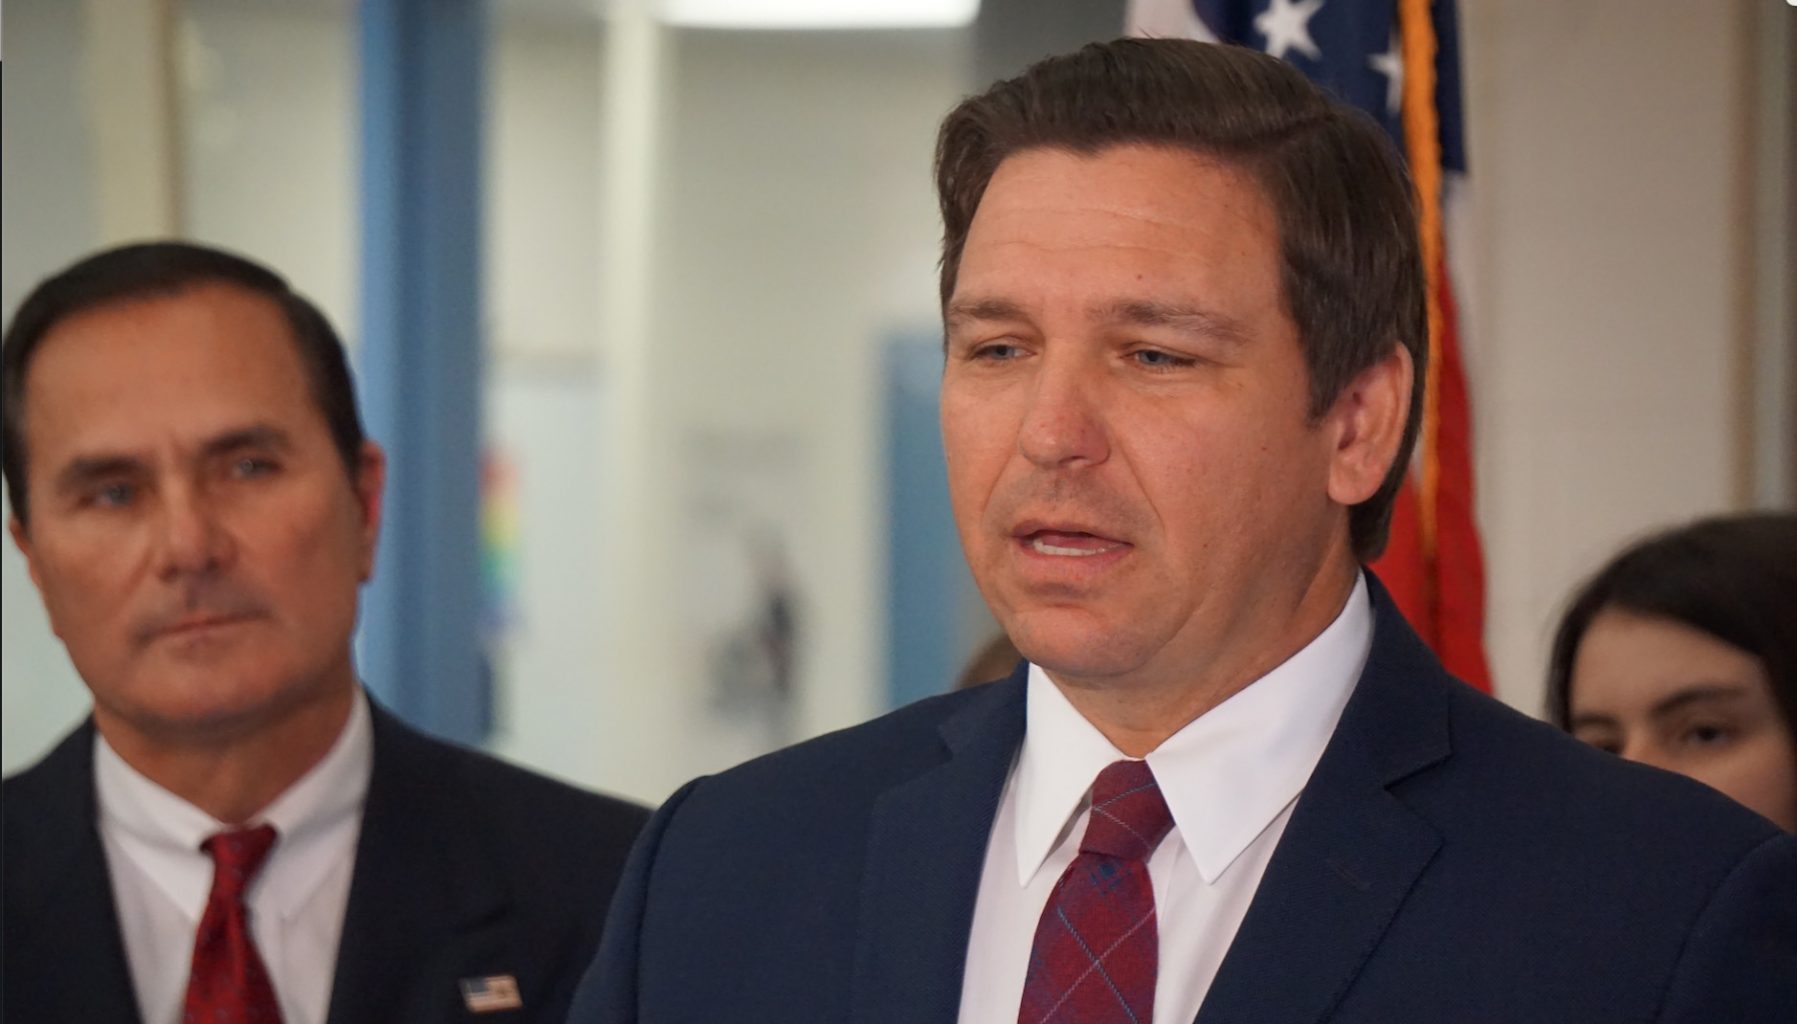 DeSantis' Request Granted to Investigate Human Trafficking in Florida